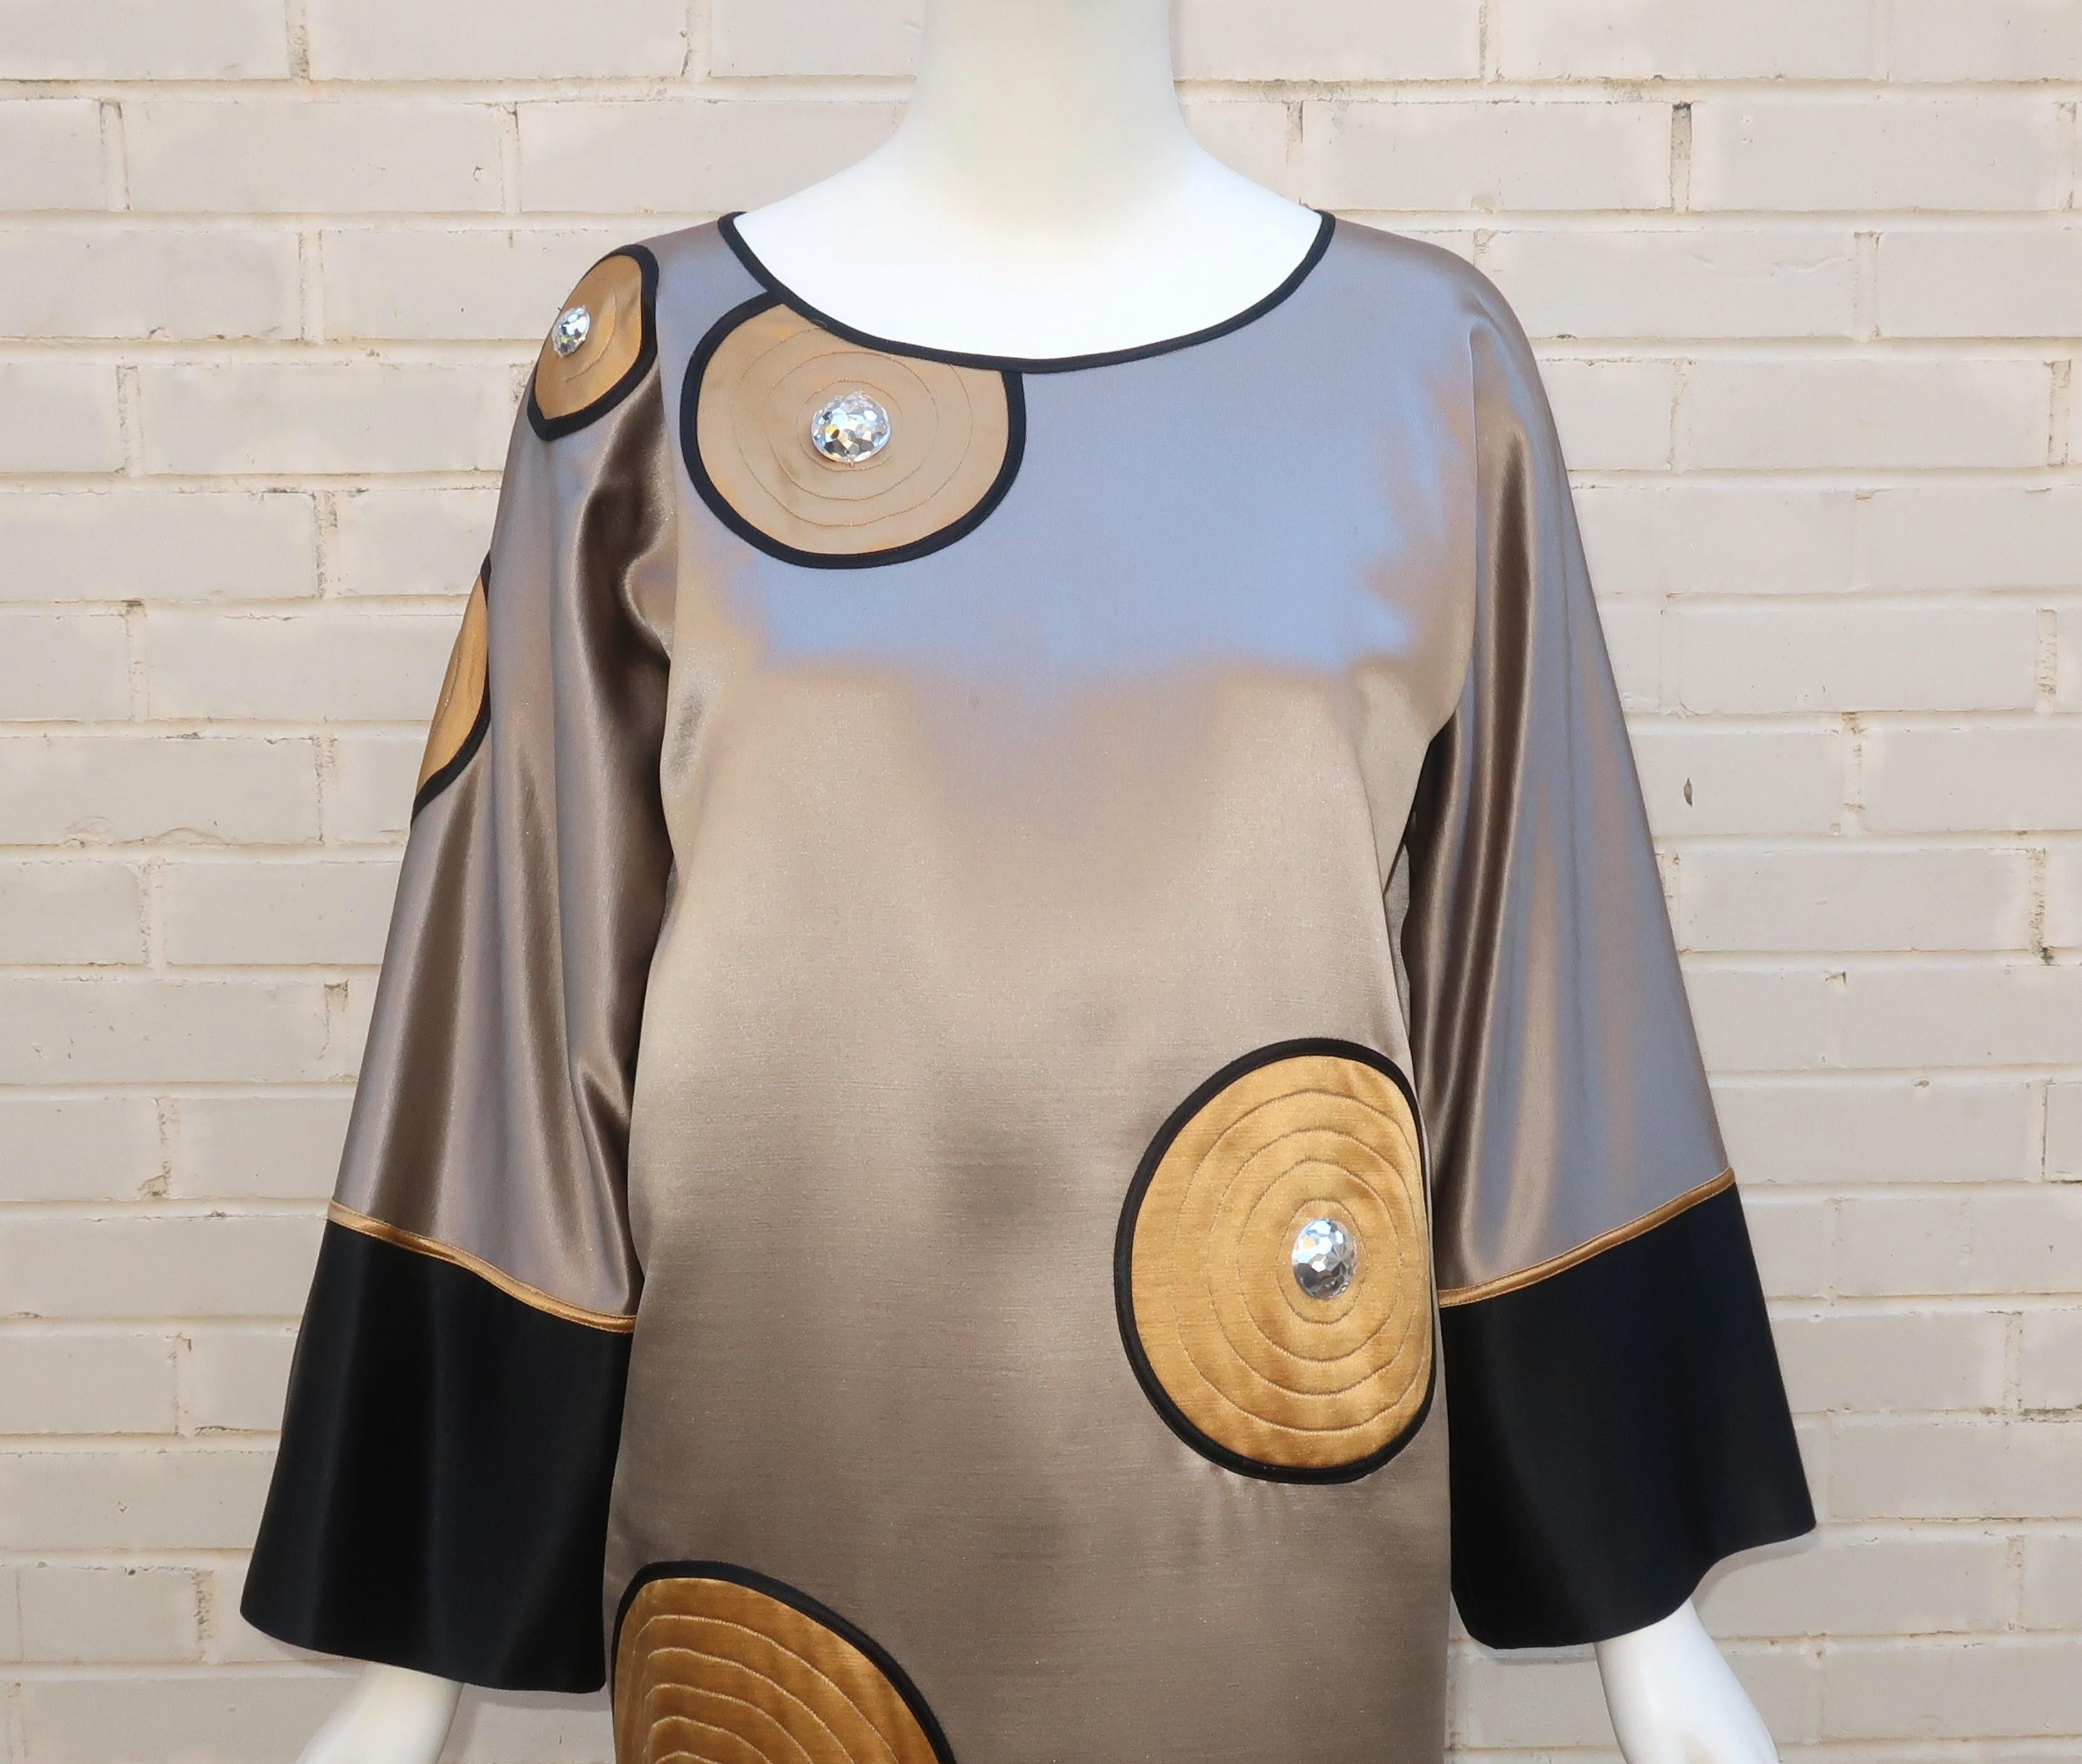 Fall/Winter 1983 Geoffrey Beene shift dress with kimono style sleeves, appliqued circles and 'disco ball' embellishments.  This fabulous dress is simply wearable art with all the wit and chic details one would expect from Geoffrey Beene.  The fabric